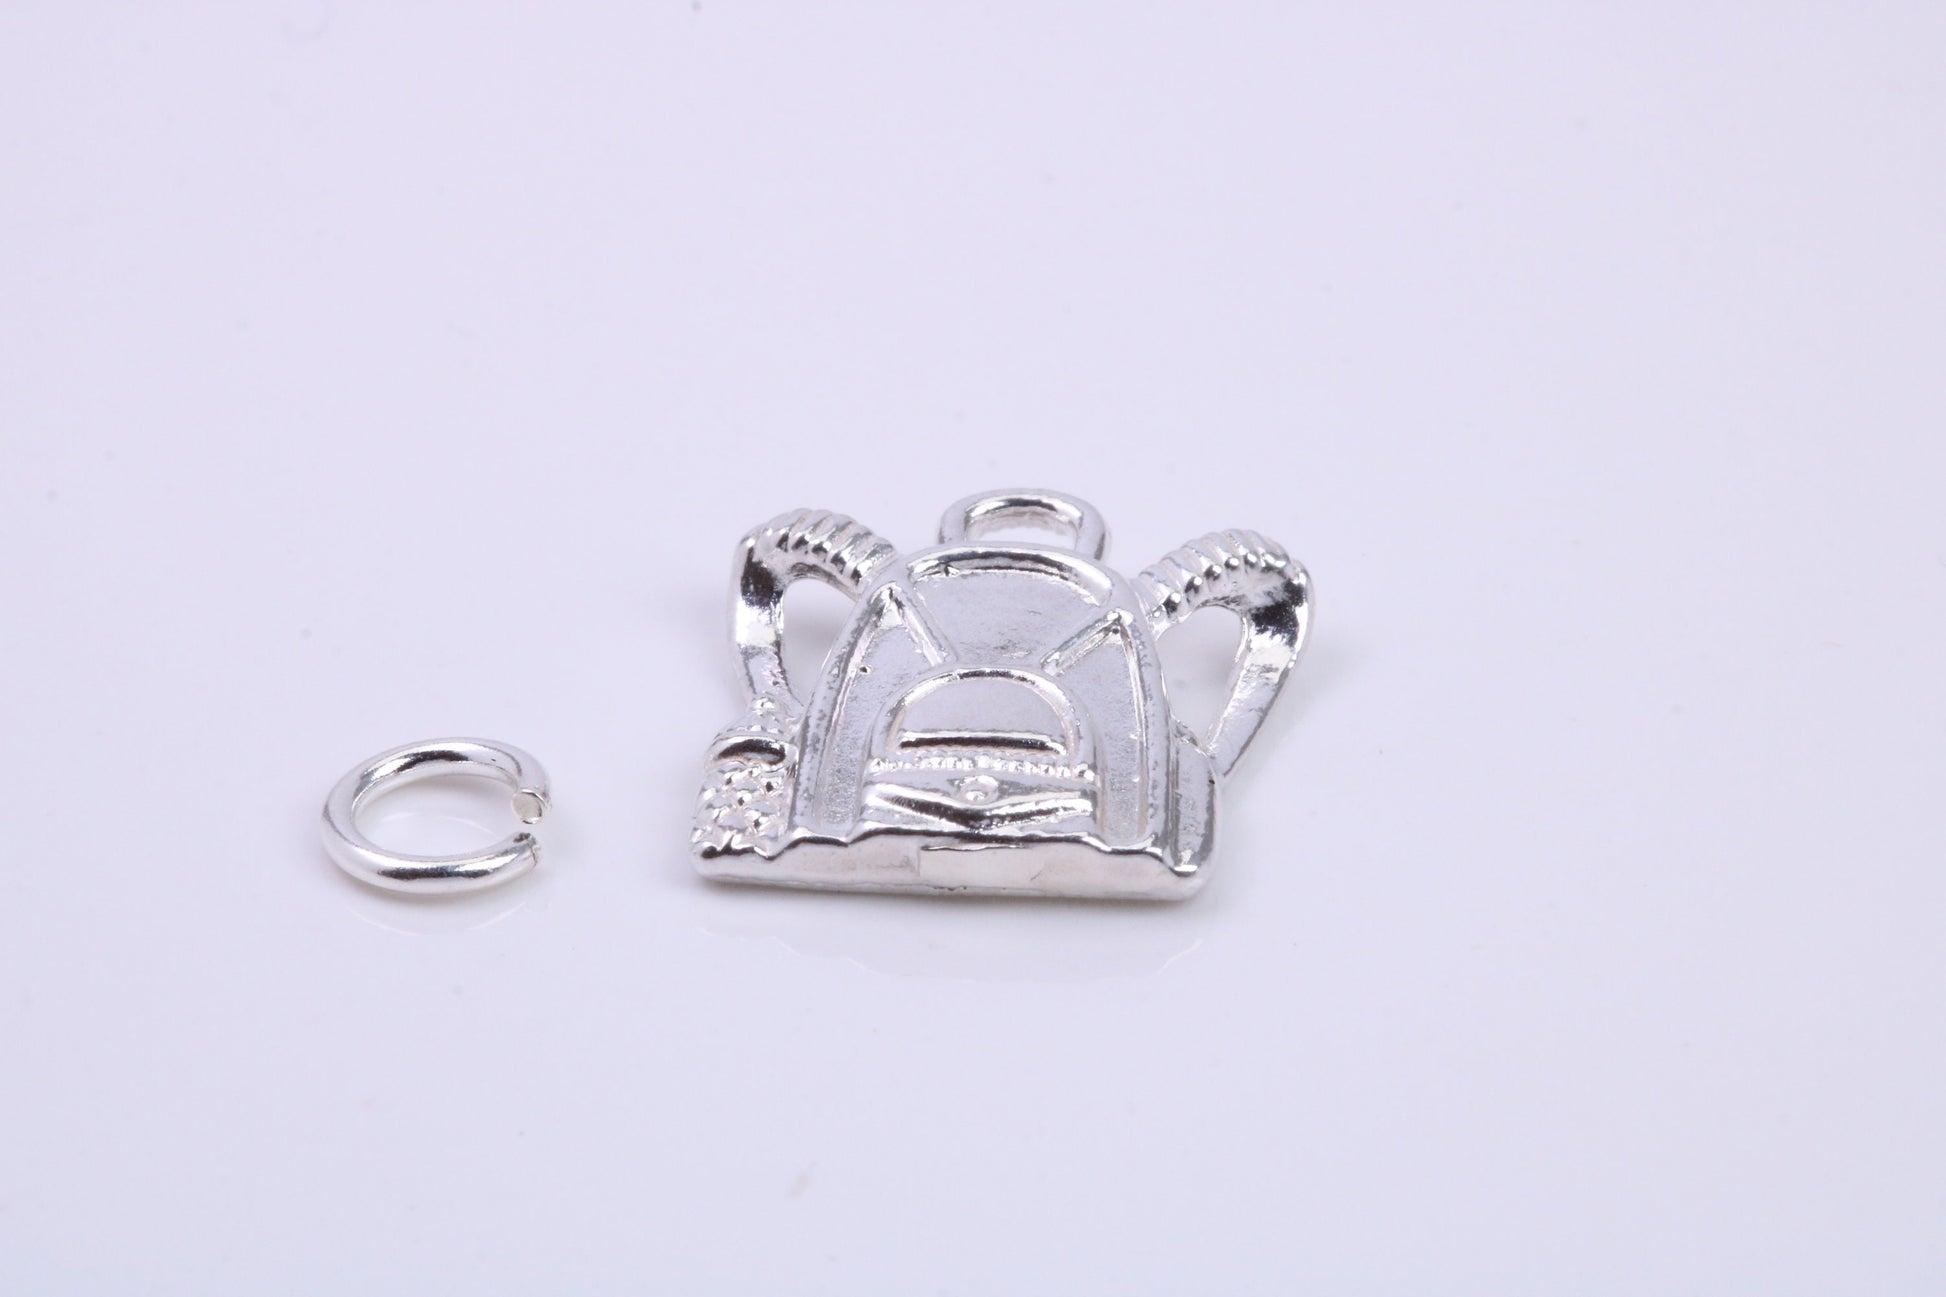 Back Pack Charm, Traditional Charm, Made from Solid 925 Grade Sterling Silver, Complete with Attachment Link